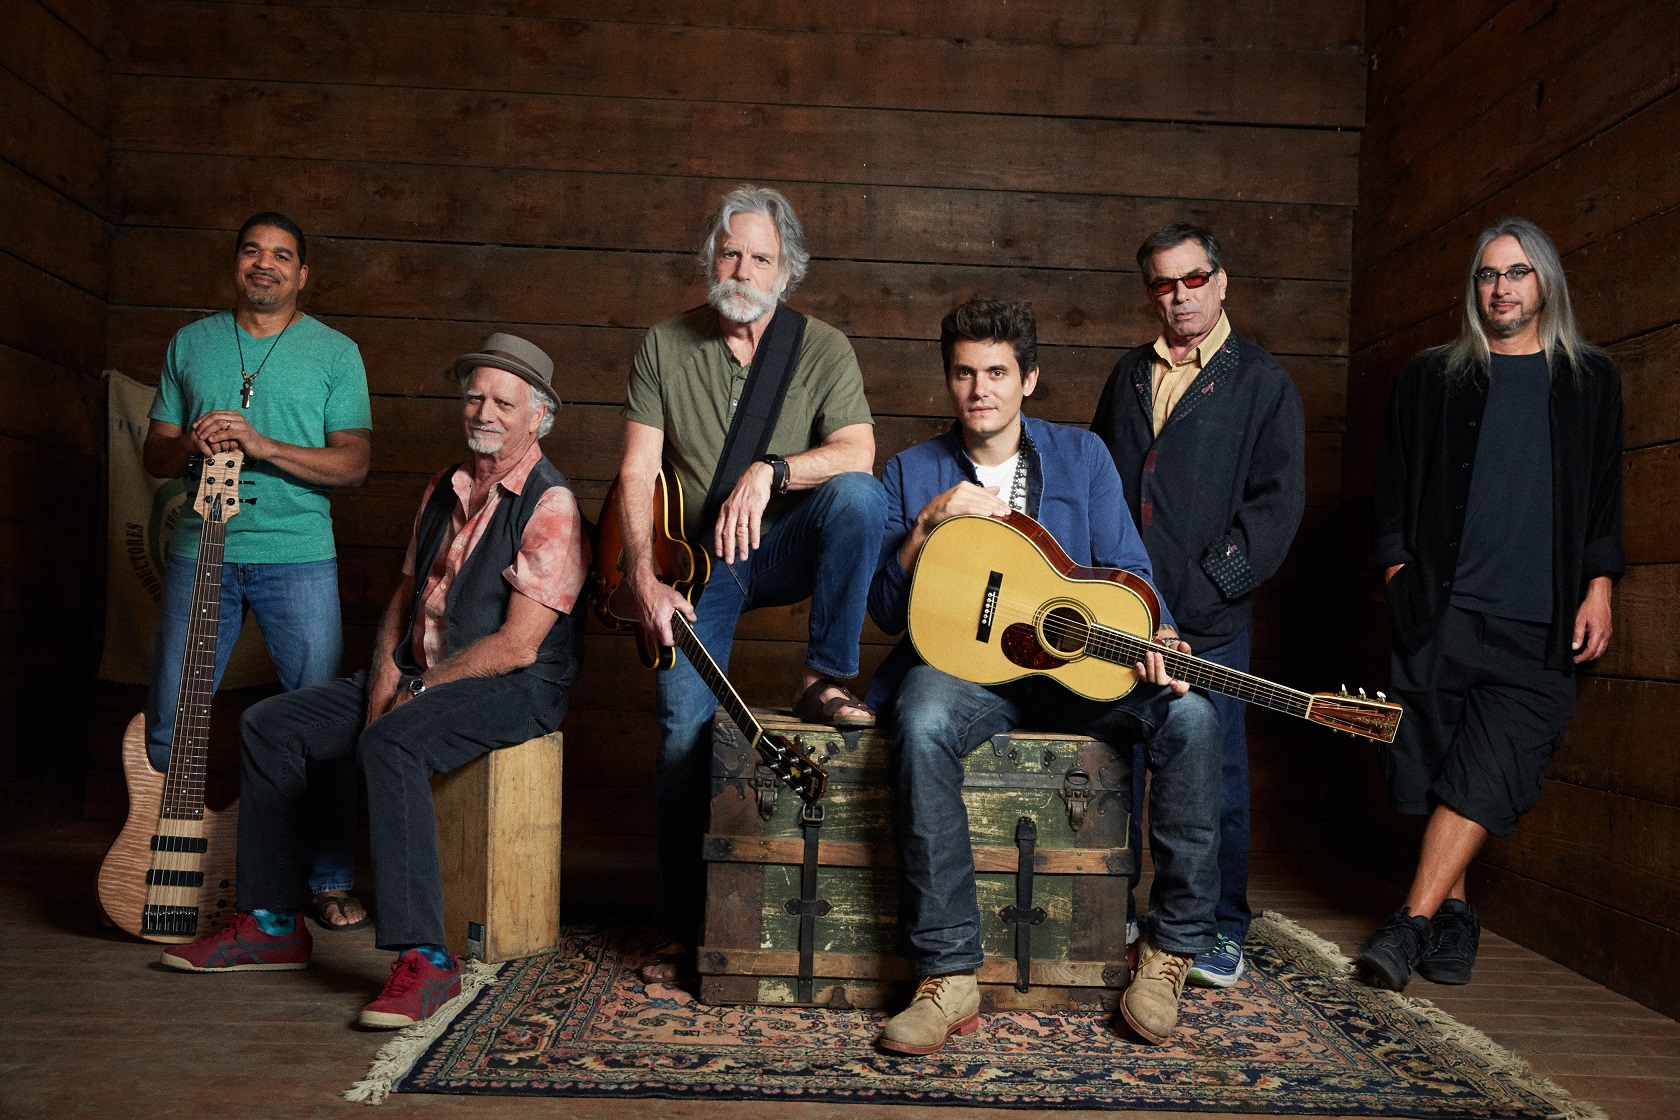 The Dead & Company tour lineup (Photo: Danny Clinch. Used with permission)